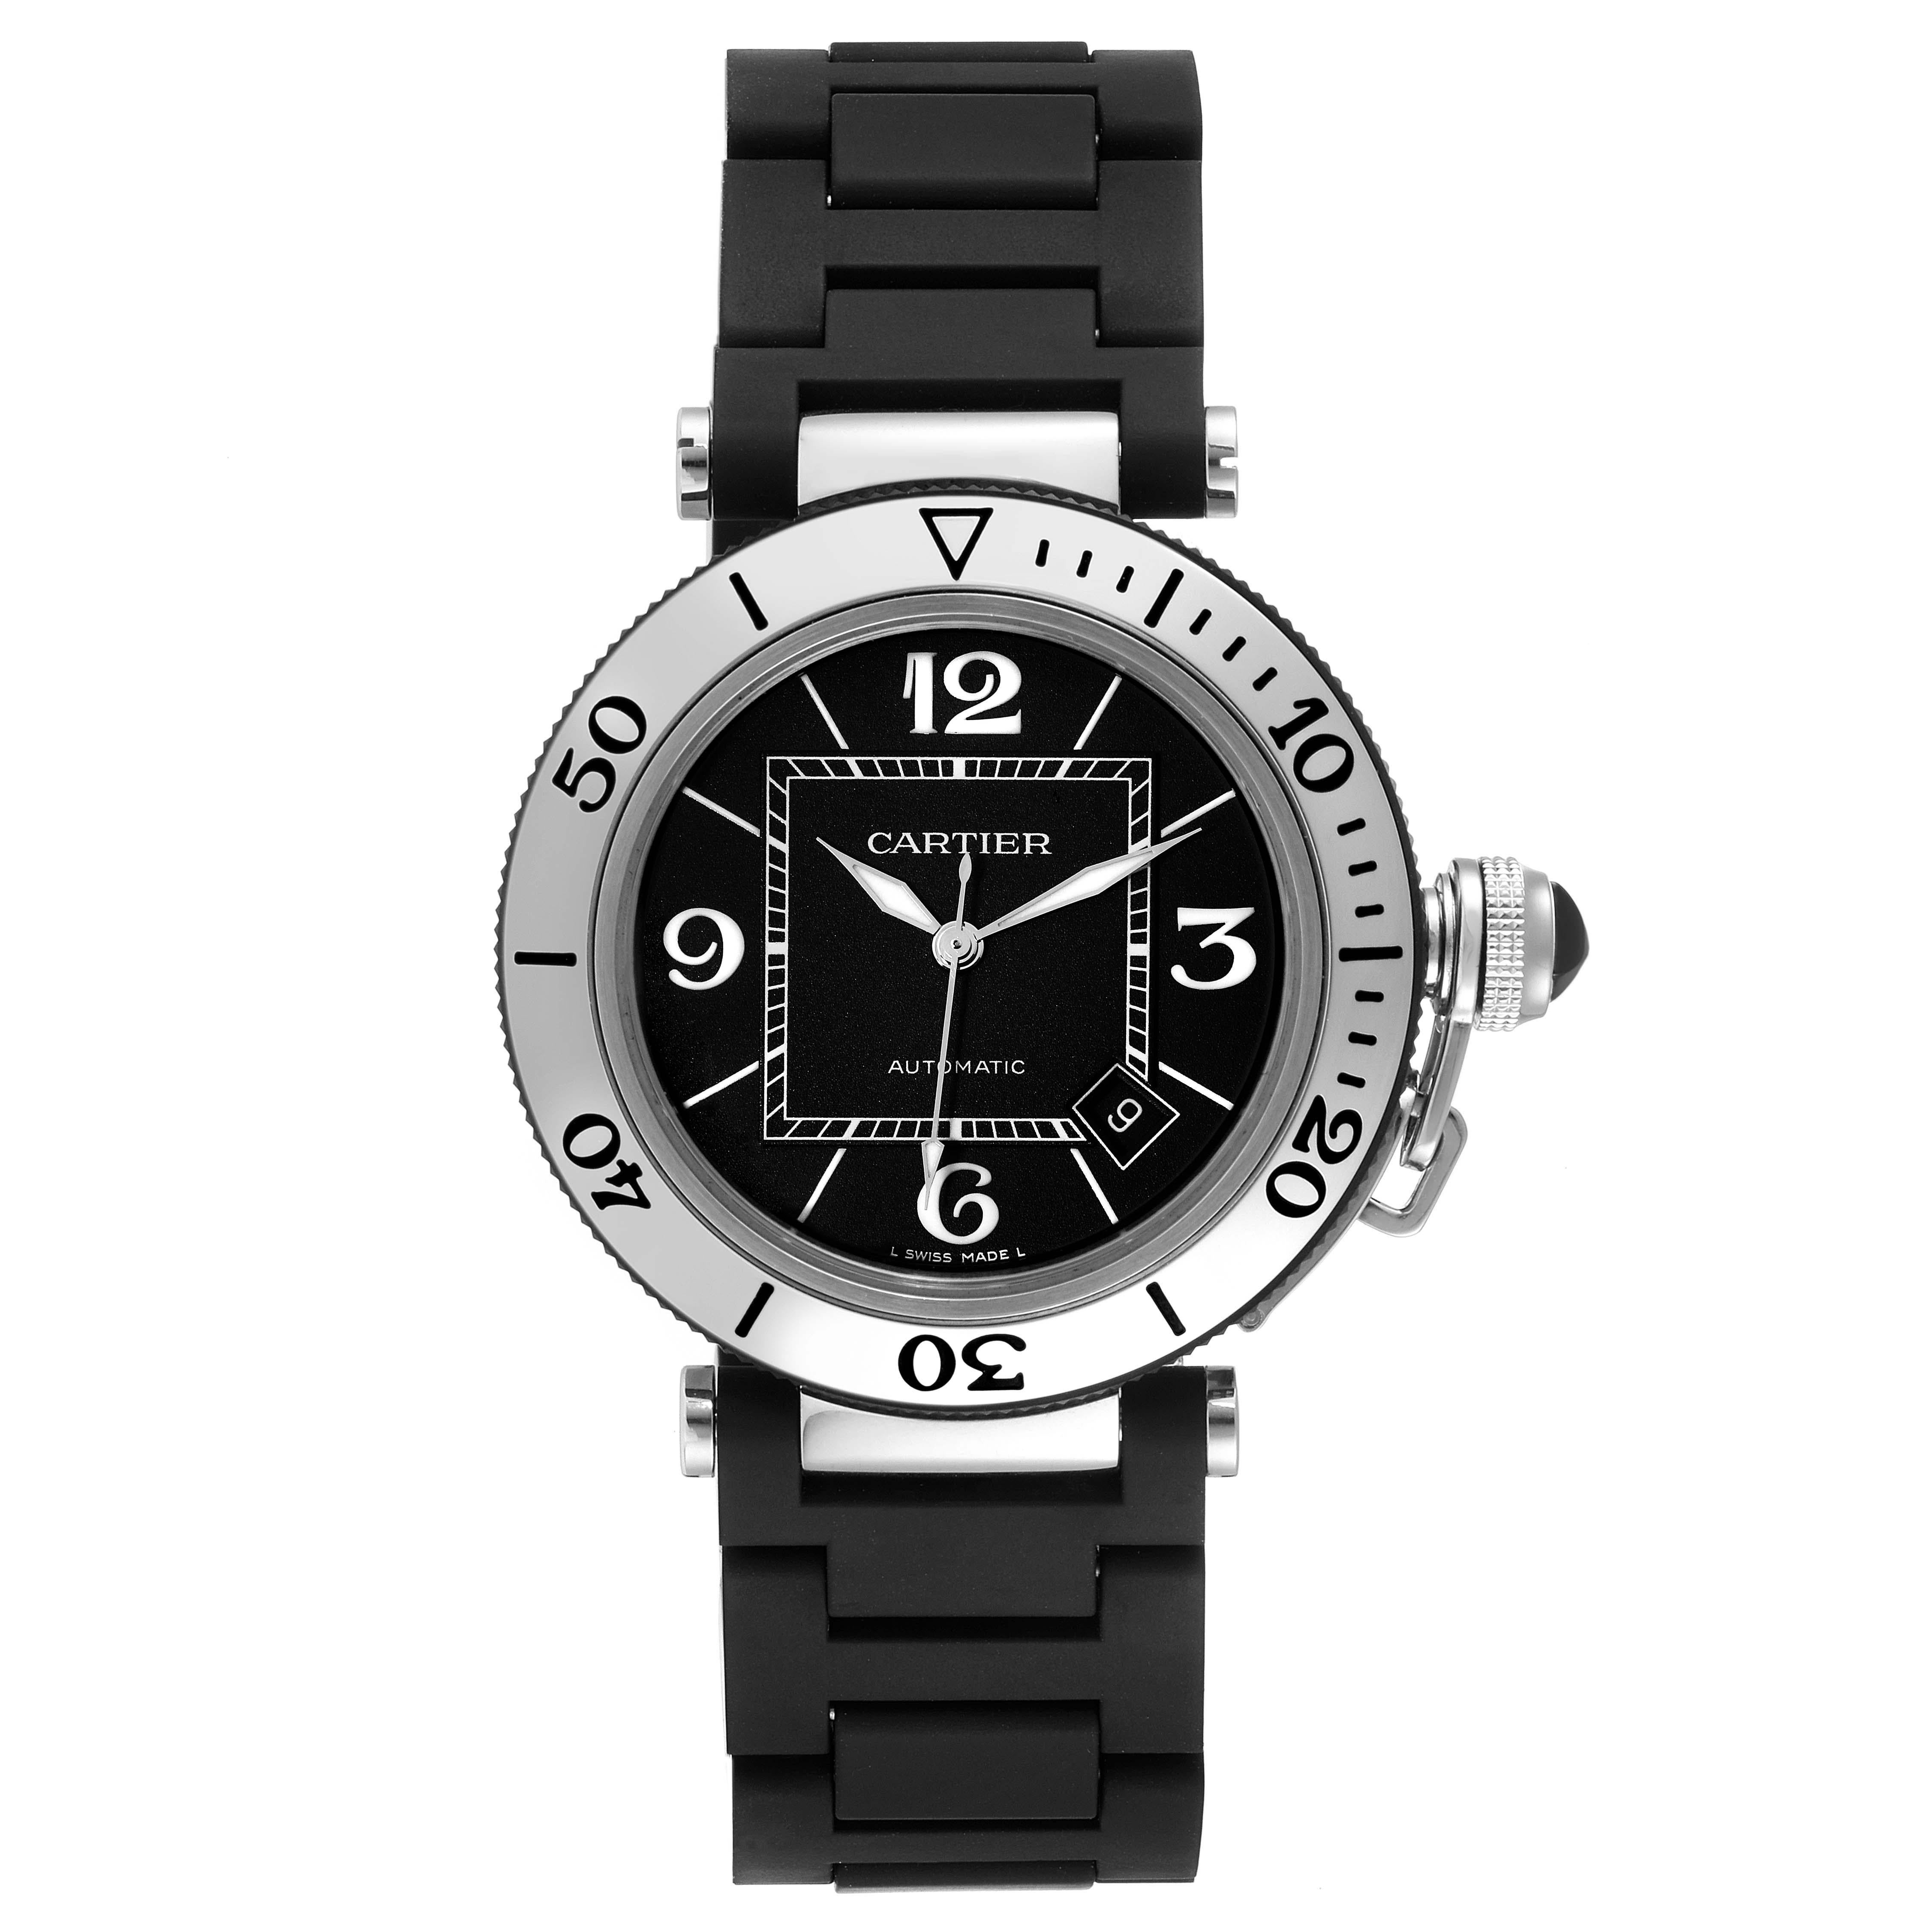 Cartier Pasha Seatimer Steel Rubber Bracelet Mens Watch W31077U2 Papers. Automatic self-winding movement. Round stainless steel case 40.5 mm in diameter. Crown cover with black ceramic cabochon. Unidirectional rotating dive bezel with engraved